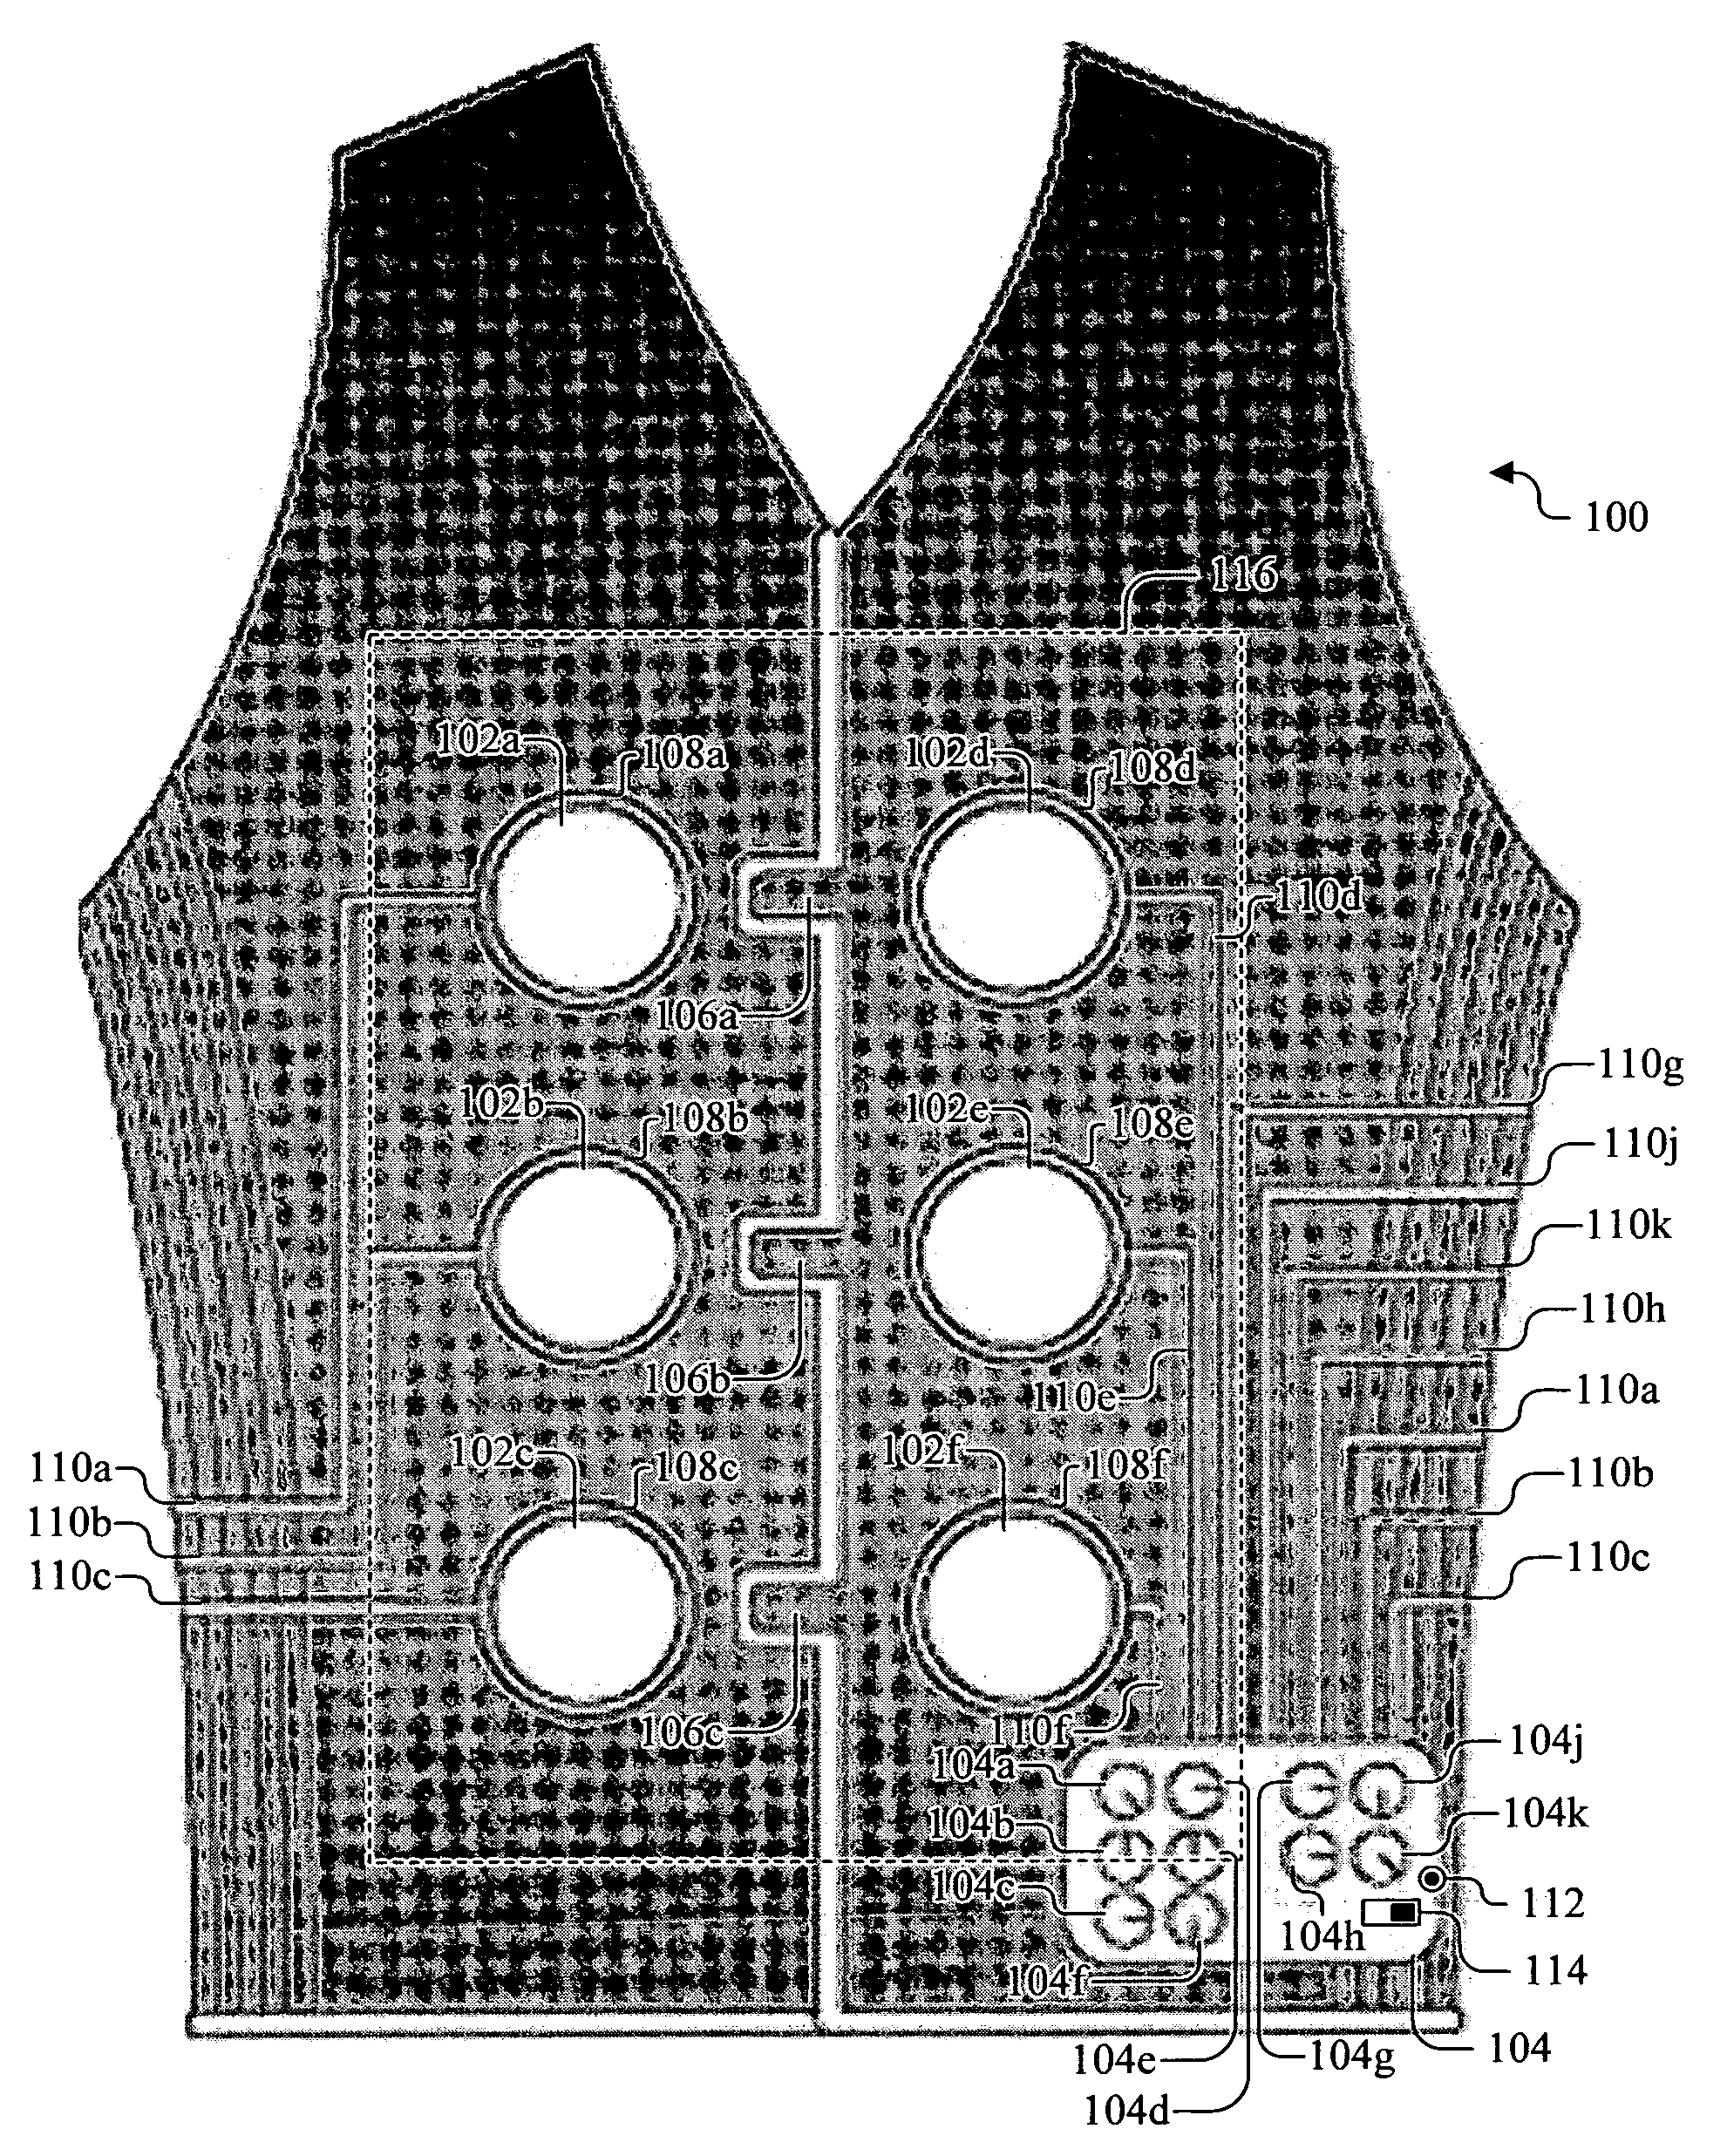 Electrode vest for electrical stimulation of the abdomen and back